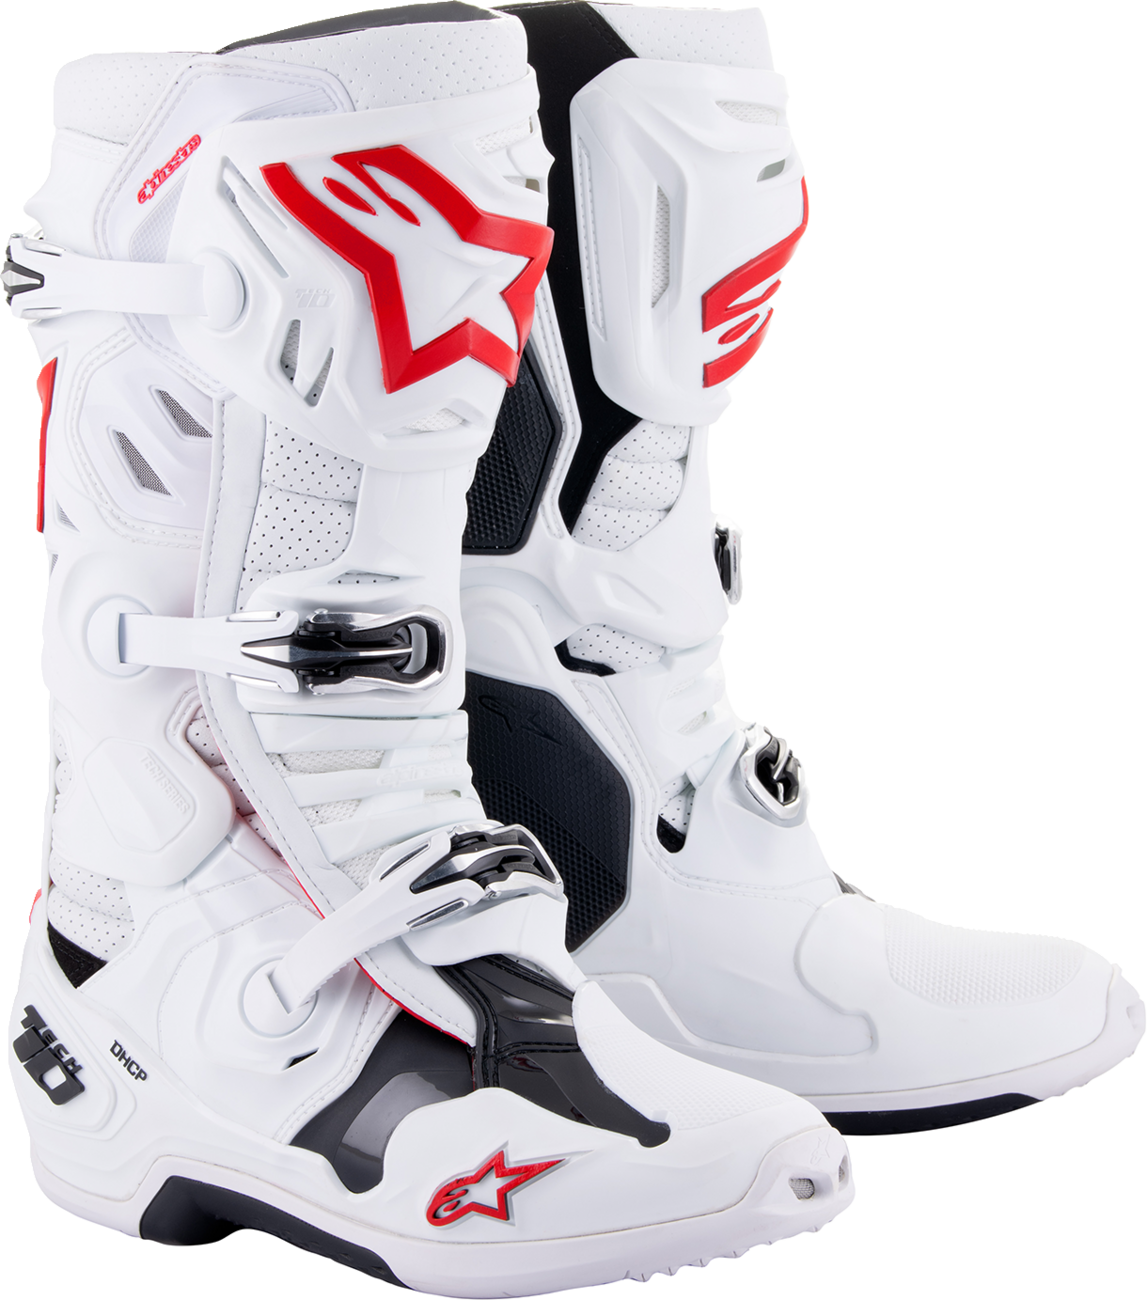 ALPINESTARS Tech 10 Supervented Boots - White/Red - US 9 2010520-2230-9